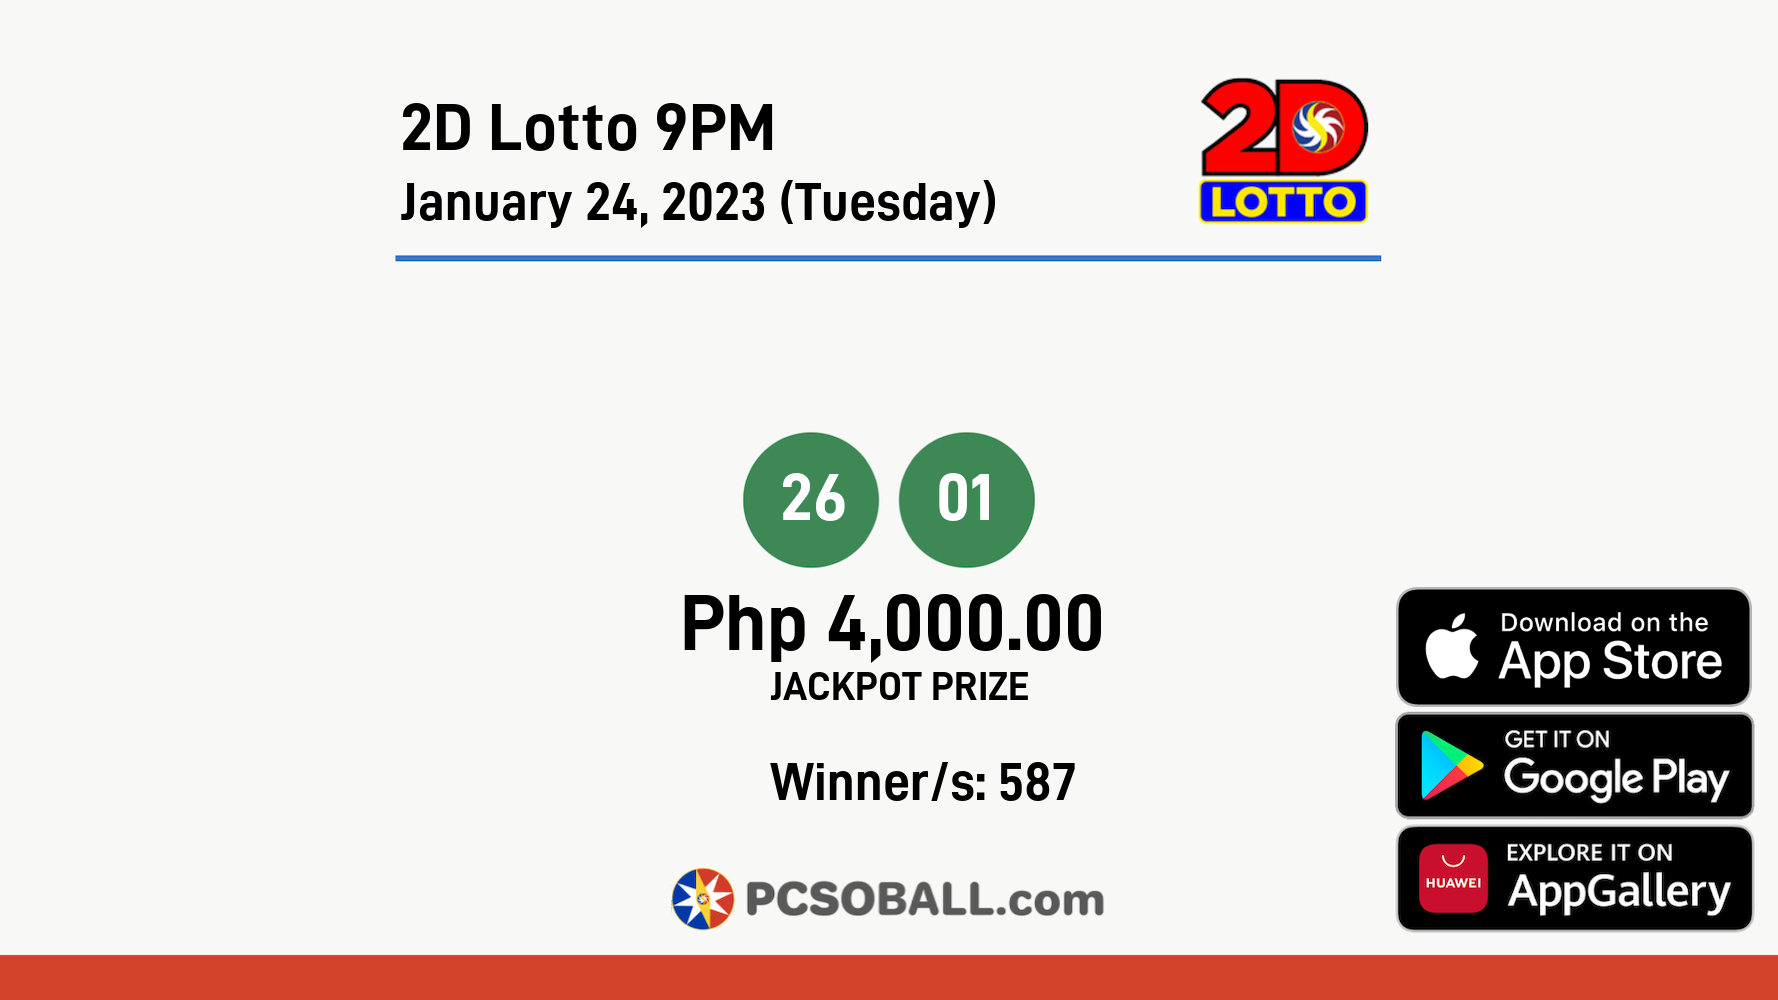 2D Lotto 9PM January 24, 2023 (Tuesday) Result